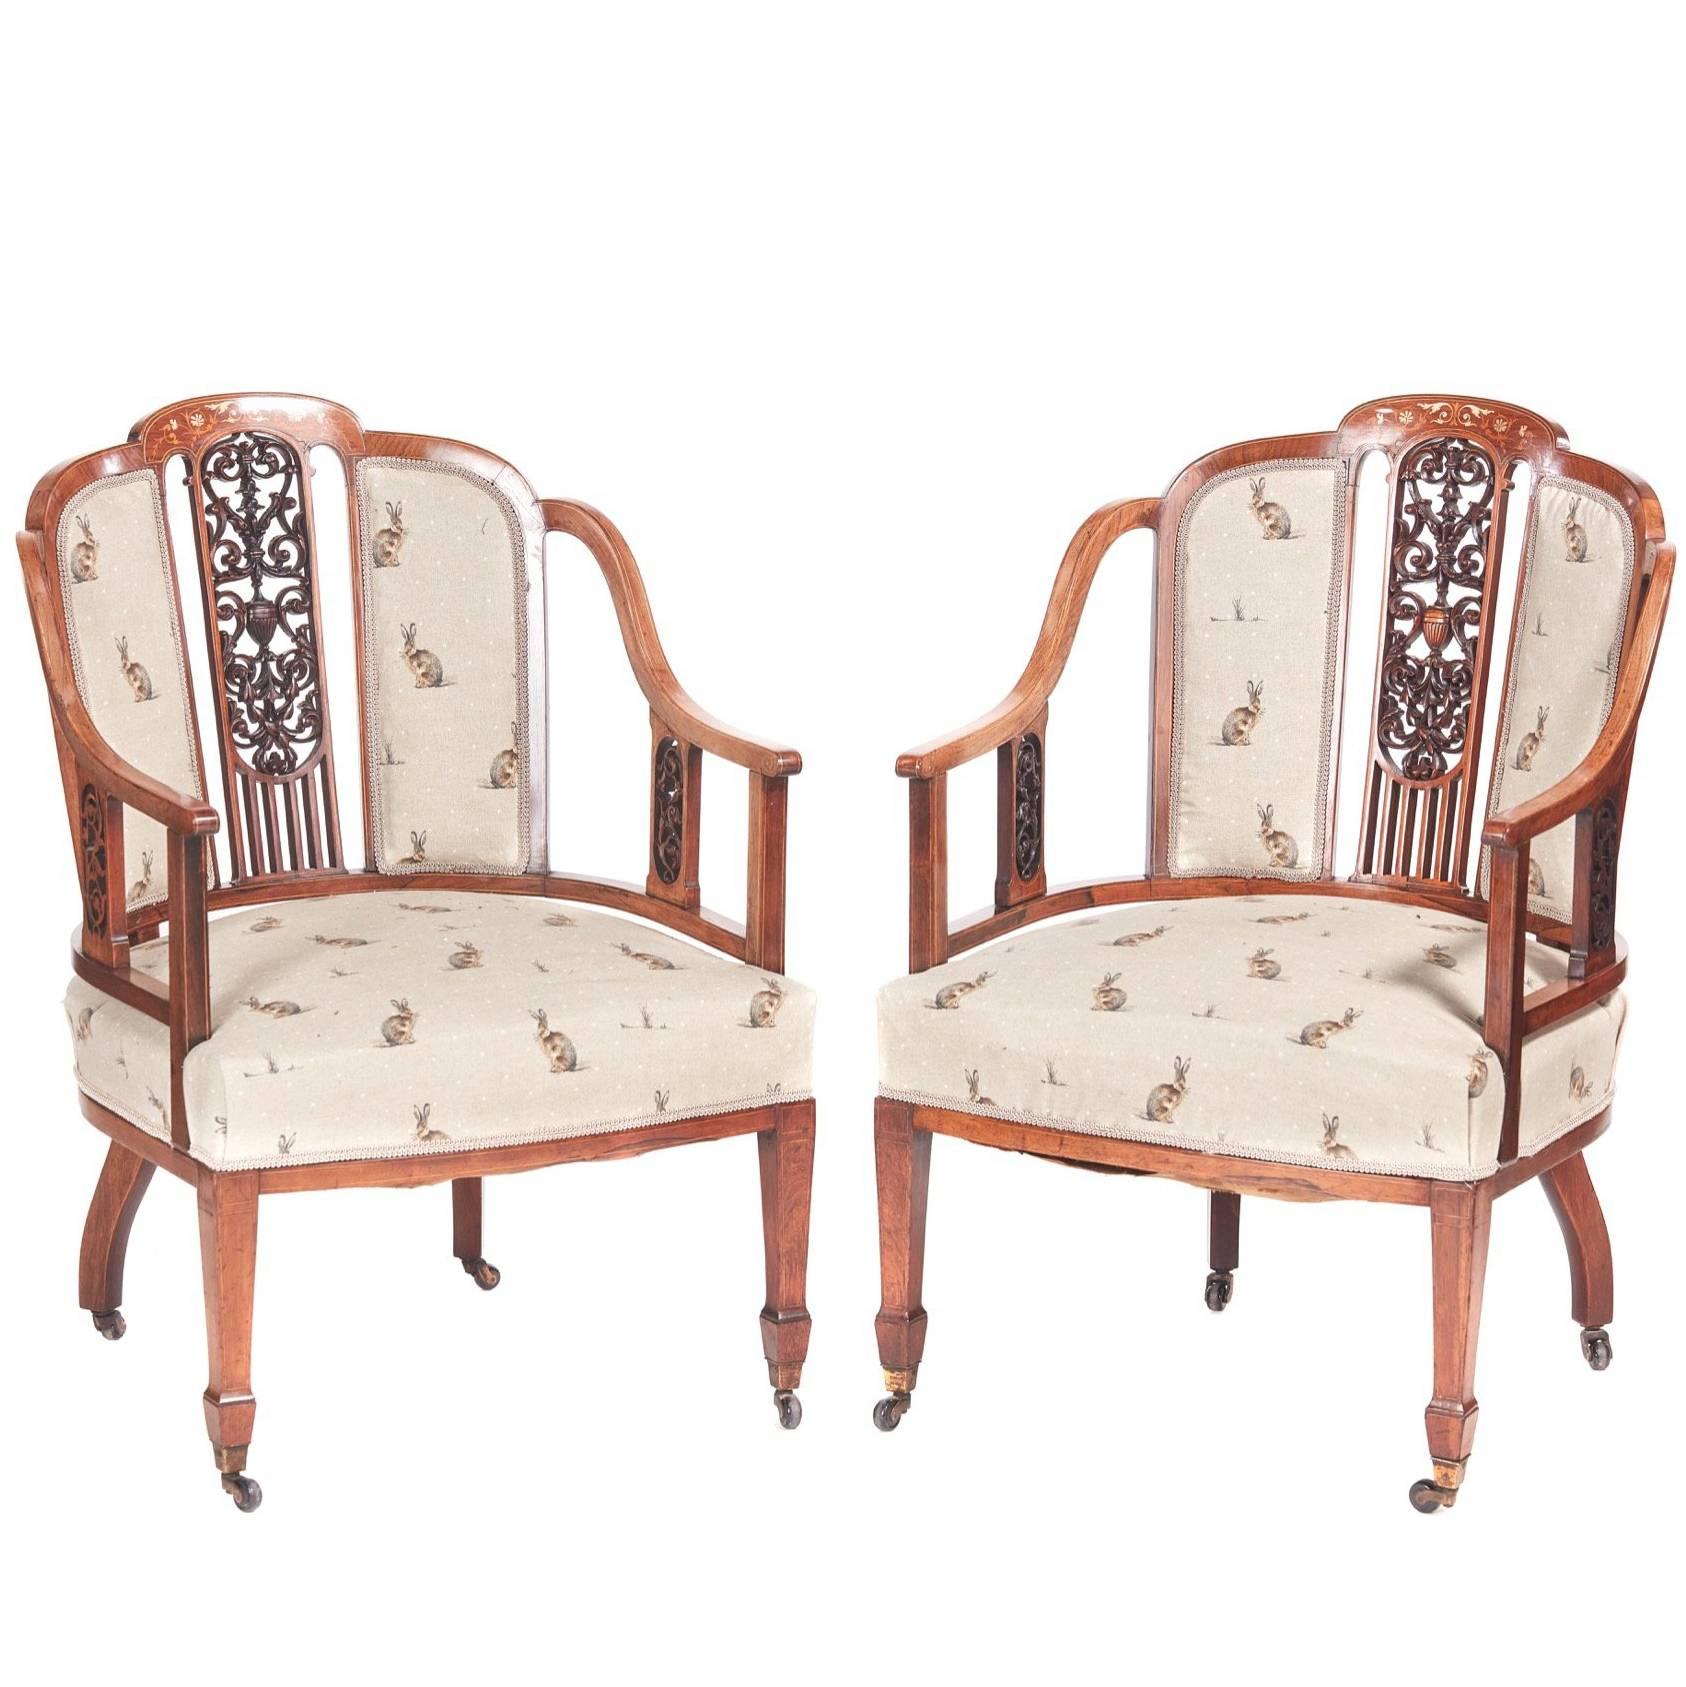 Outstanding Pair Of Edwardian Rosewood Inlaid Library Chairs